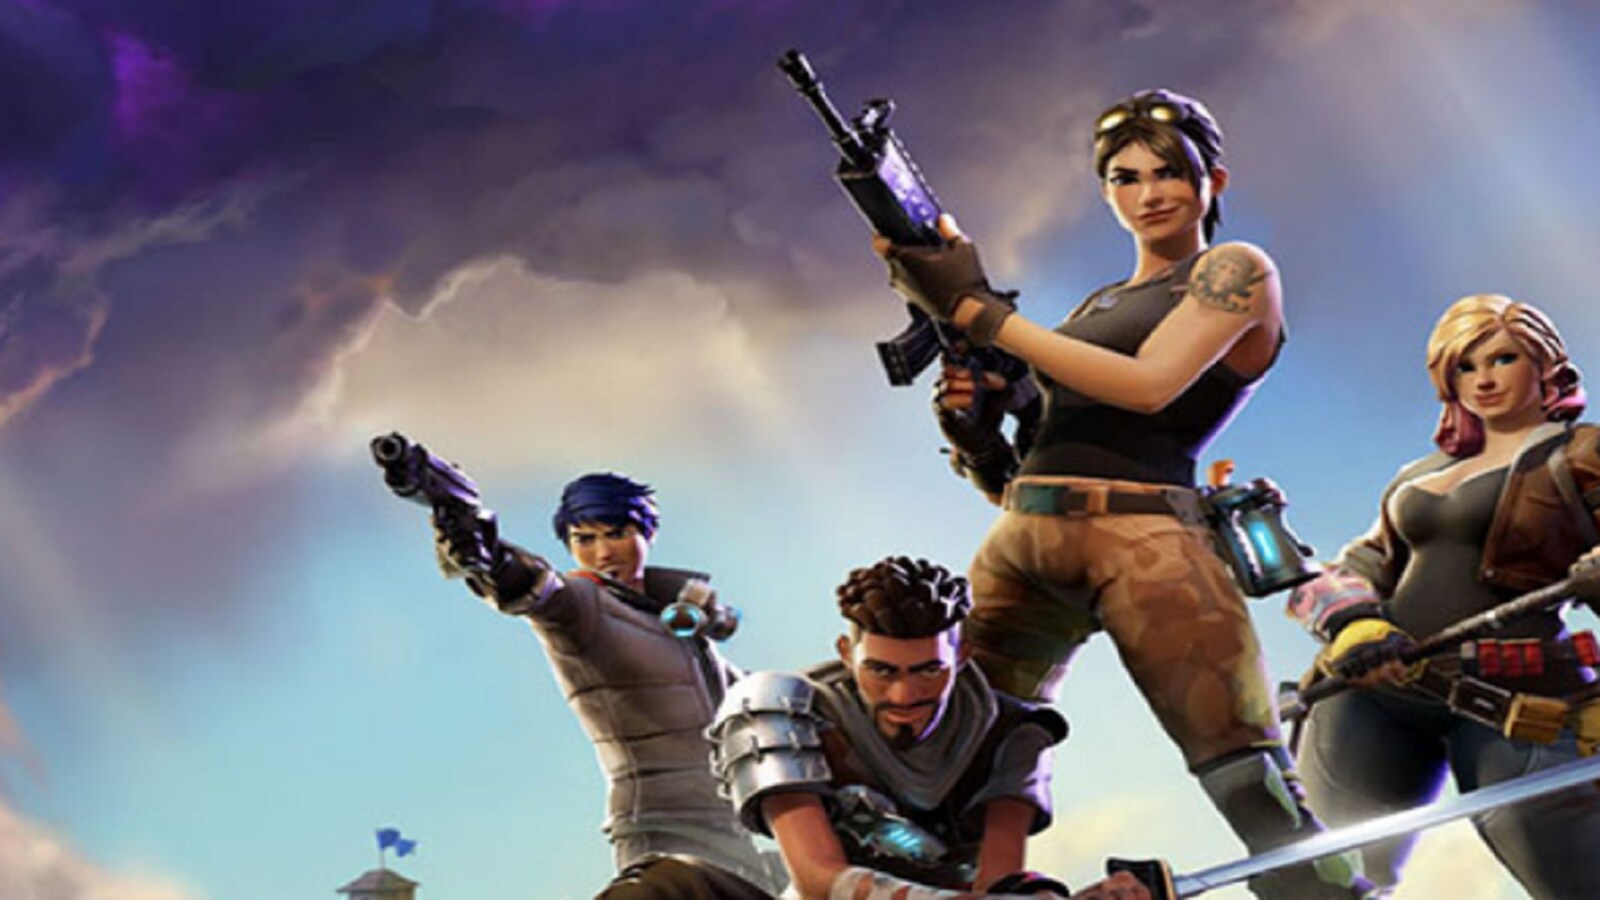 Fortnite Returns to iPhones via Xbox Cloud Gaming for Free - News18